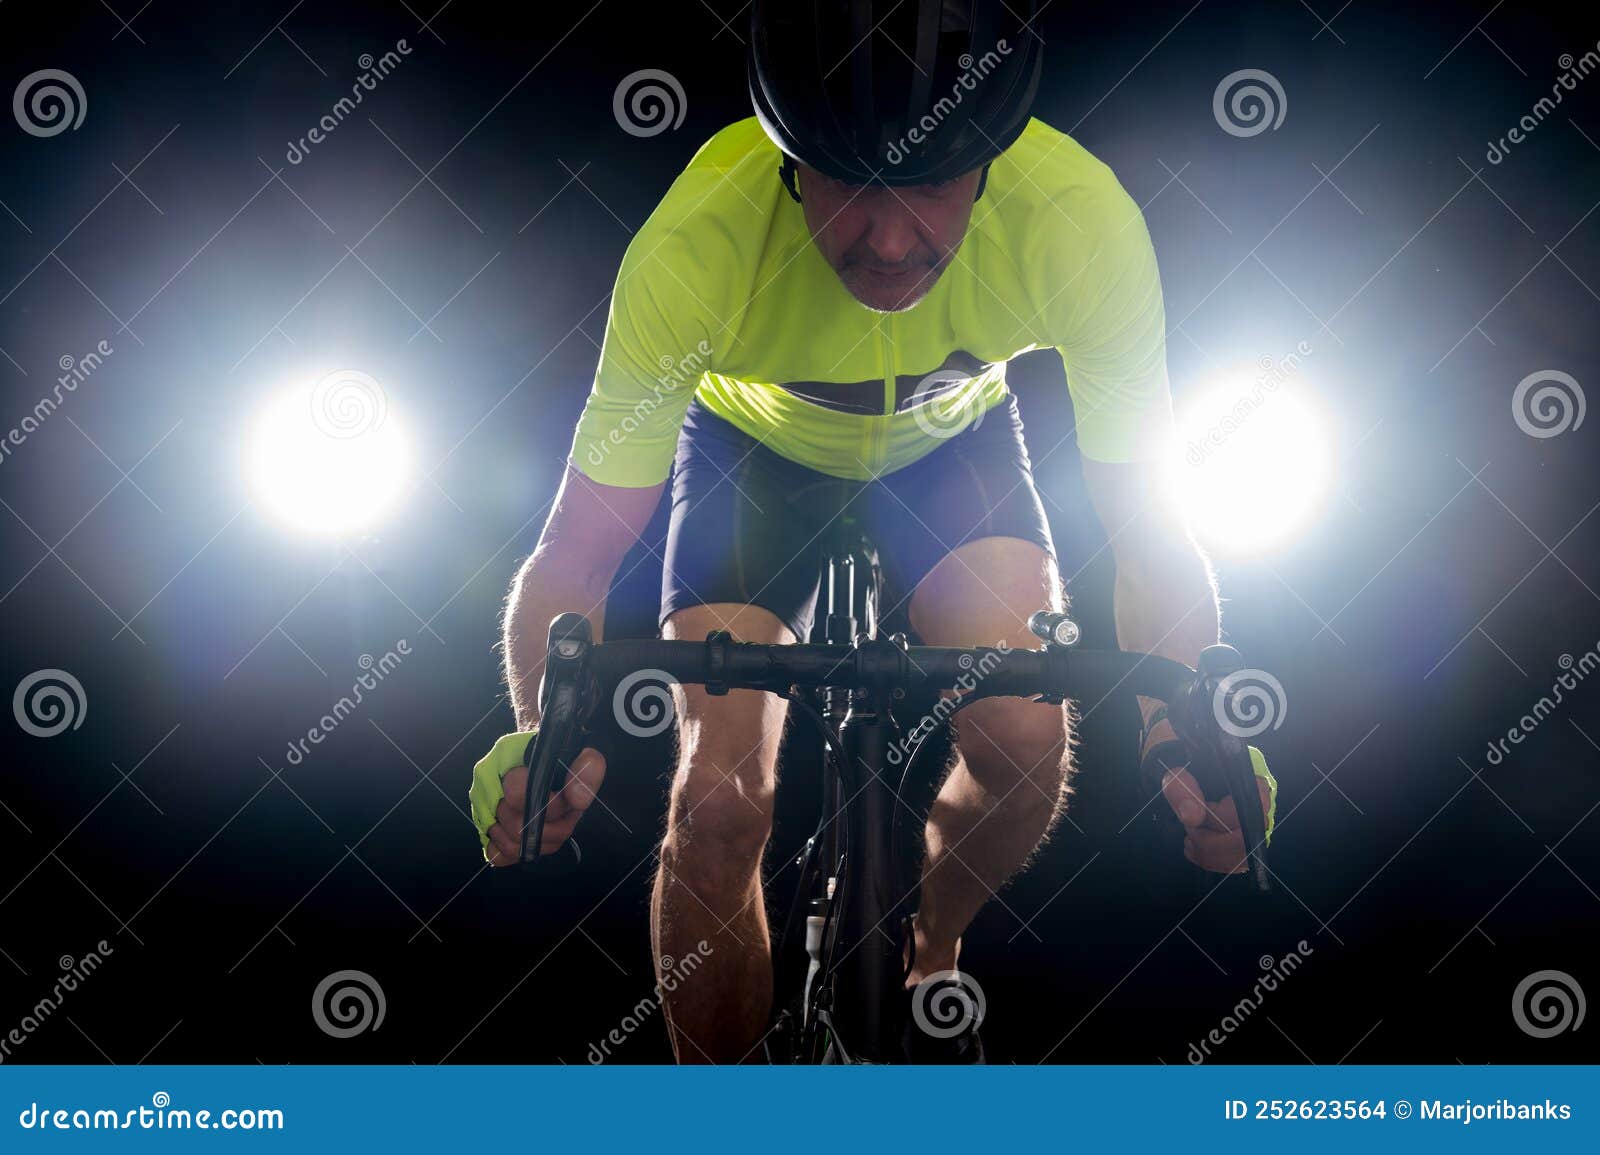 cyclist backlit on a black background. road safety tailgating concept